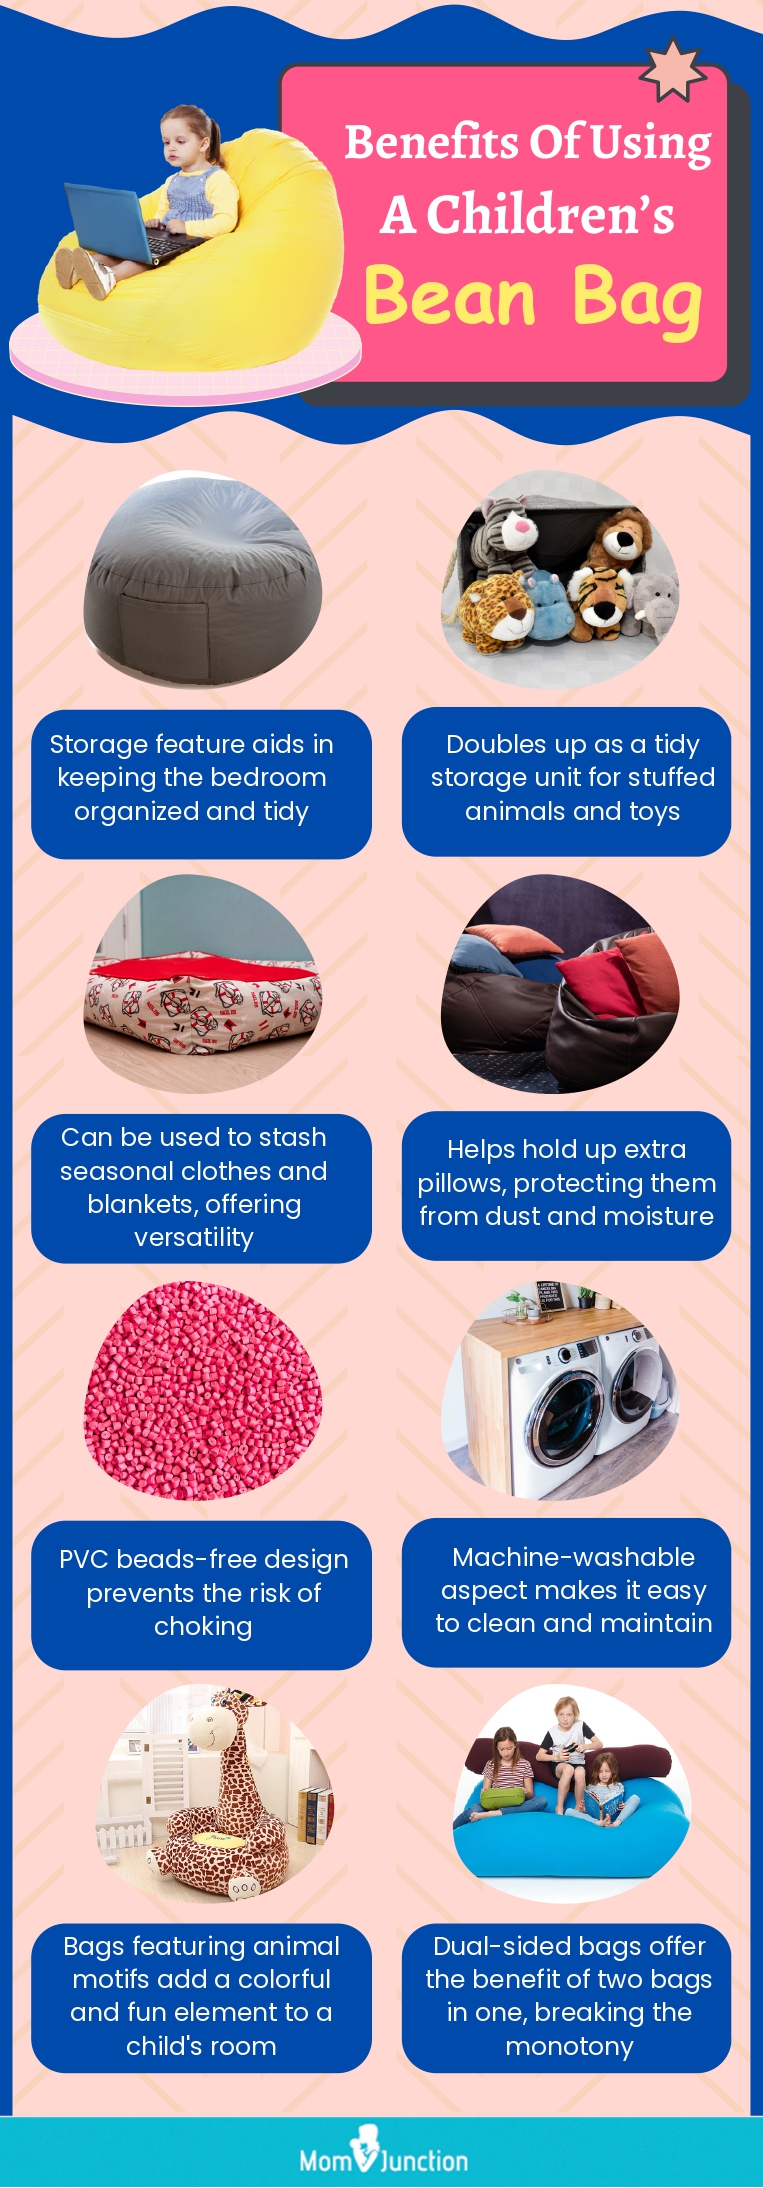 Benefits Of Using A Children’s Bean (infographic)